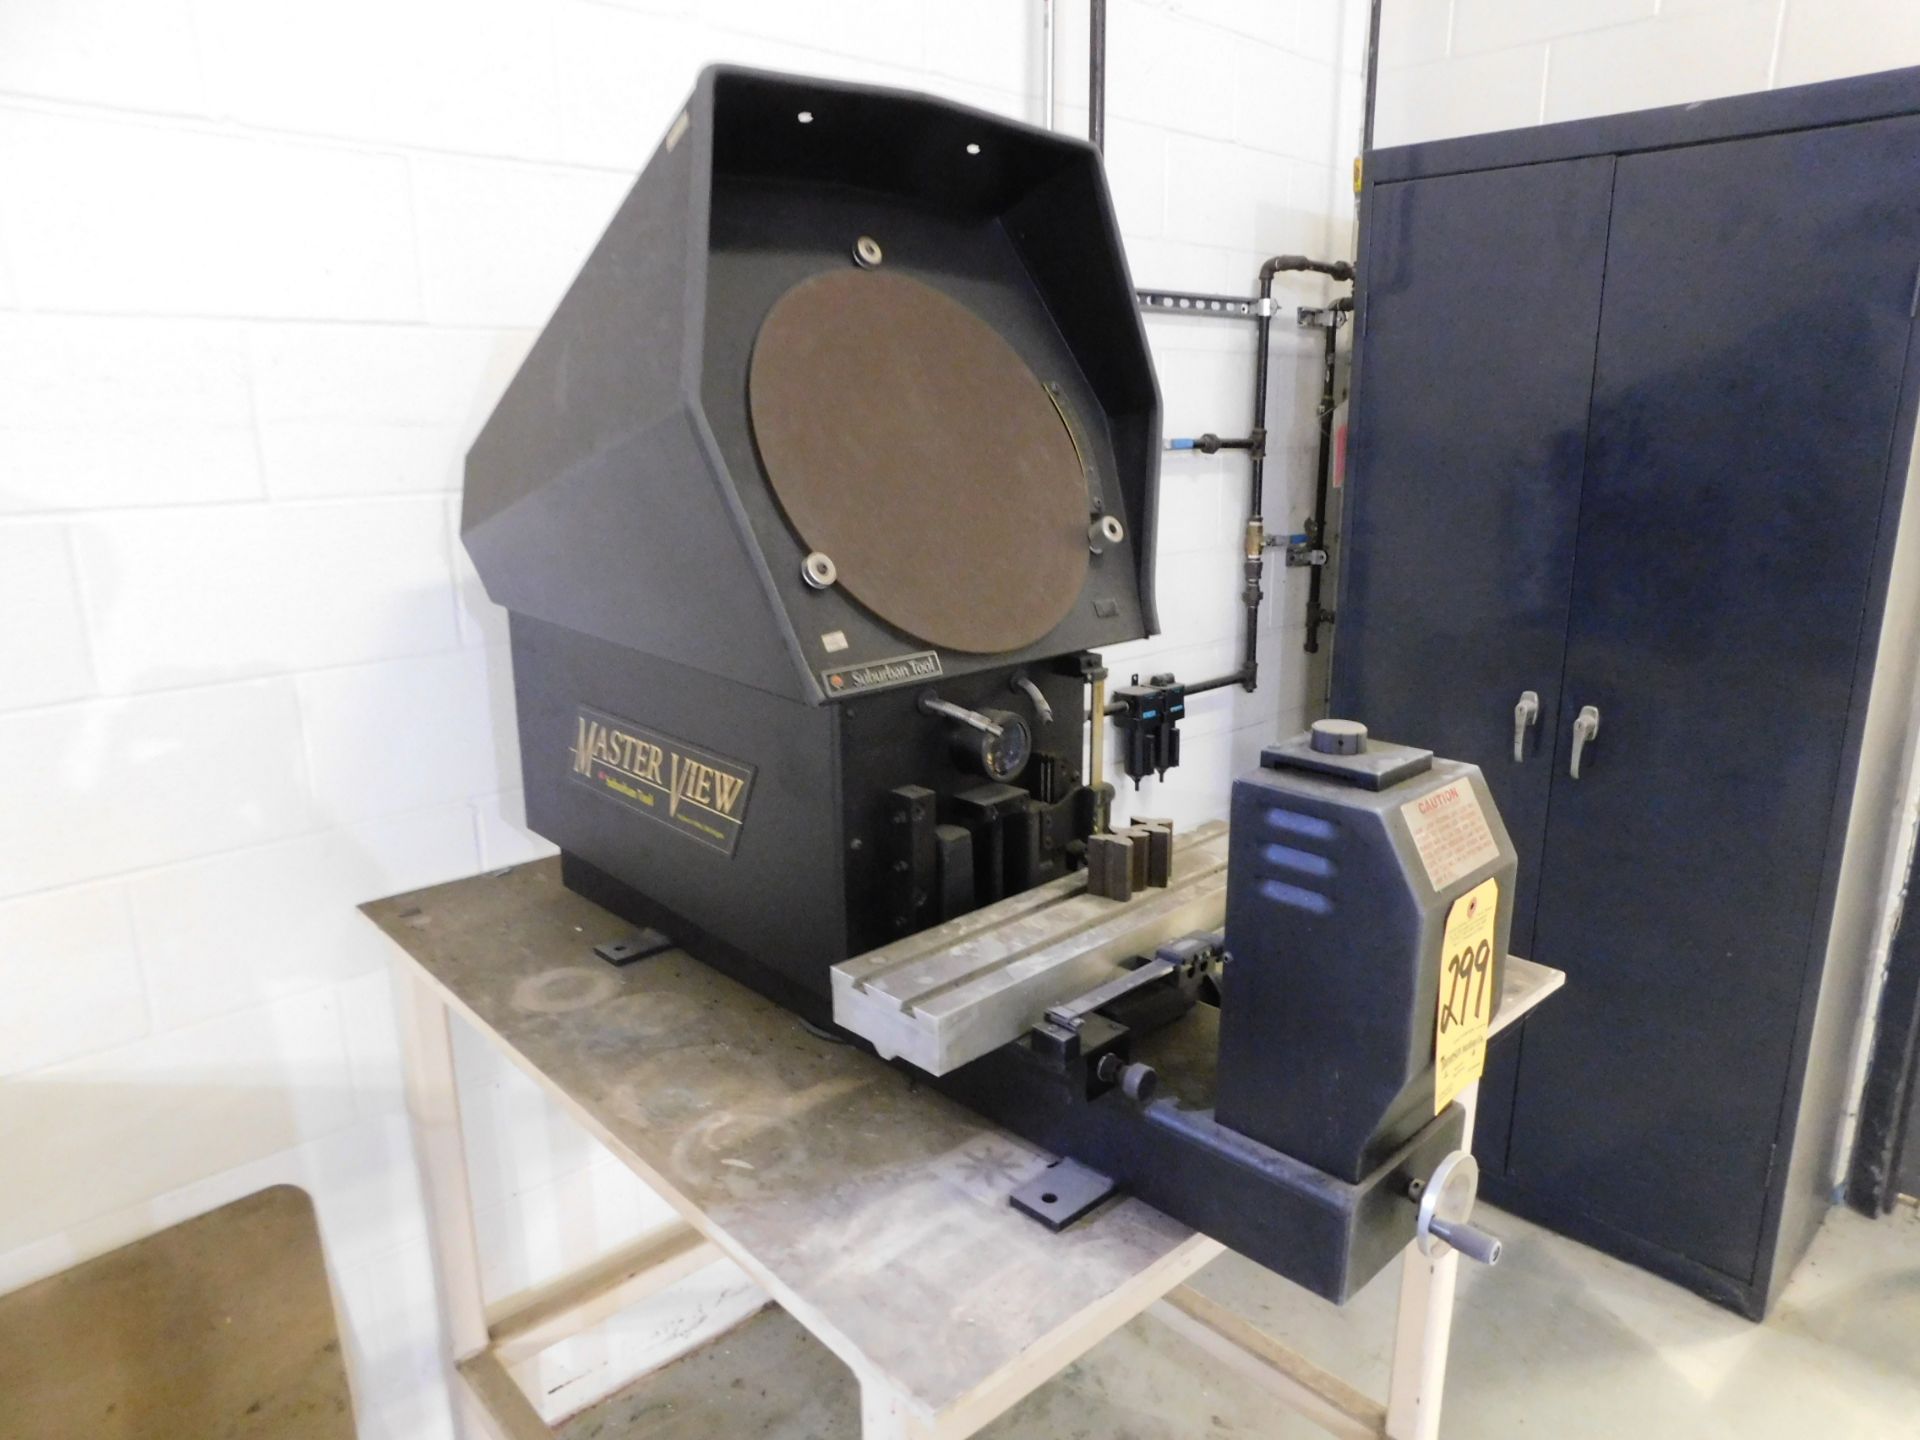 Suburban Tool Master View 14" Optical Comparator, s/n 2067-9907M, with Table